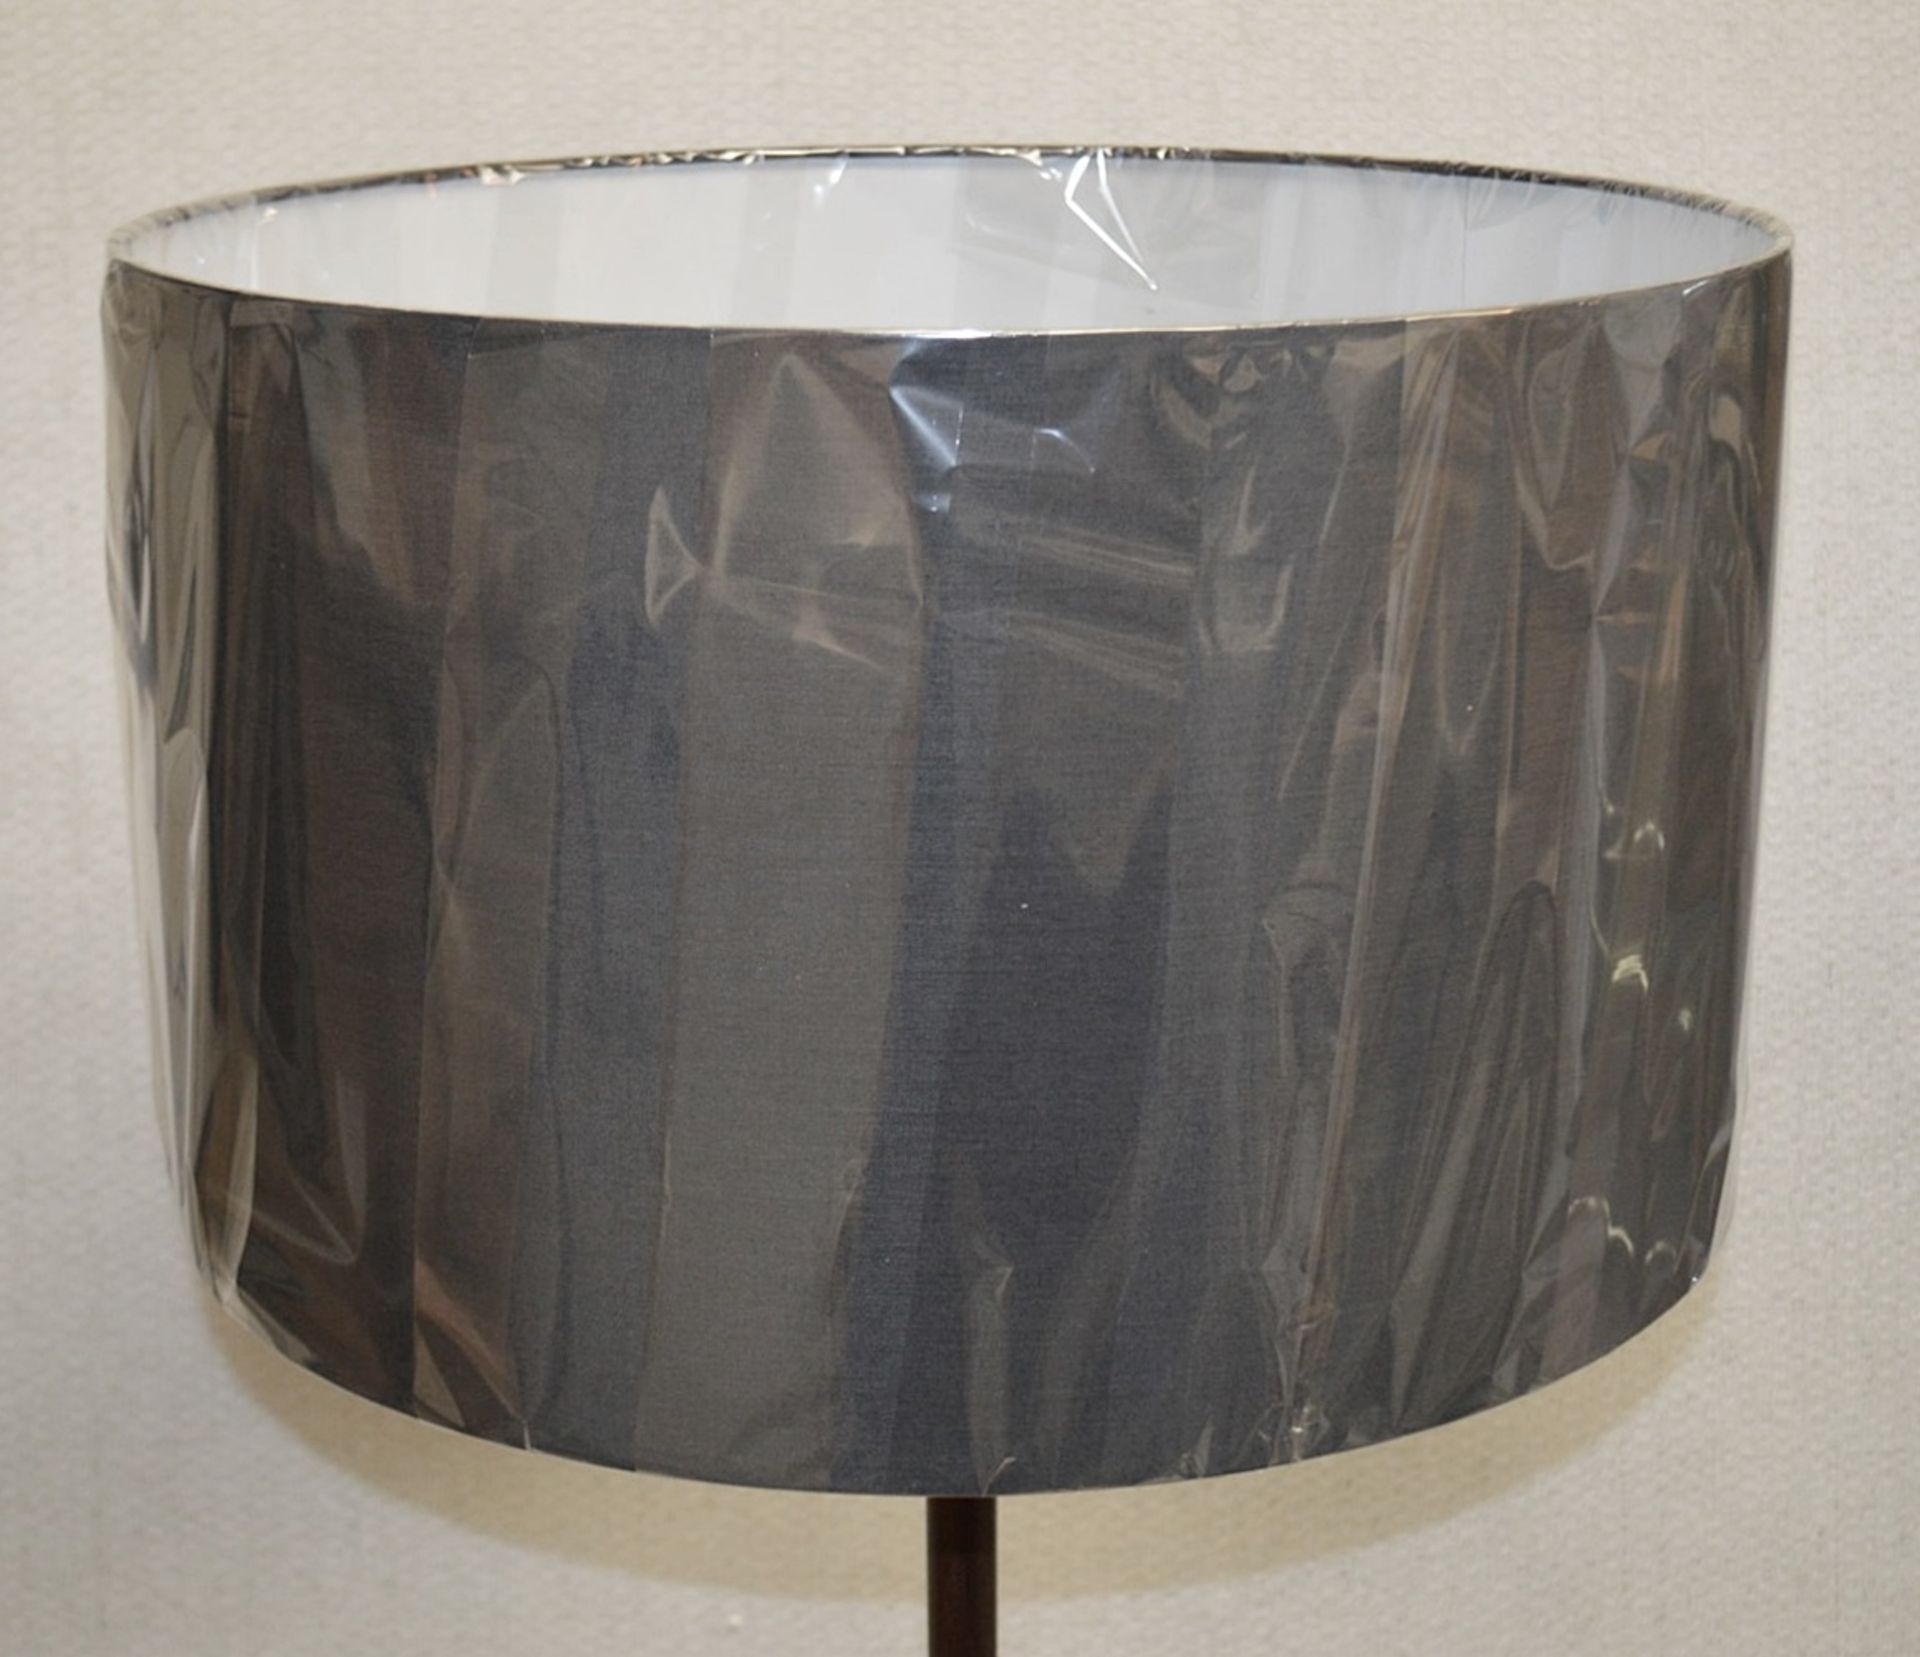 1 x CHELSOM Freestanding Lamp With Table And A Black Shade - Unused Boxed Stock - Dimensions: H143cm - Image 5 of 16